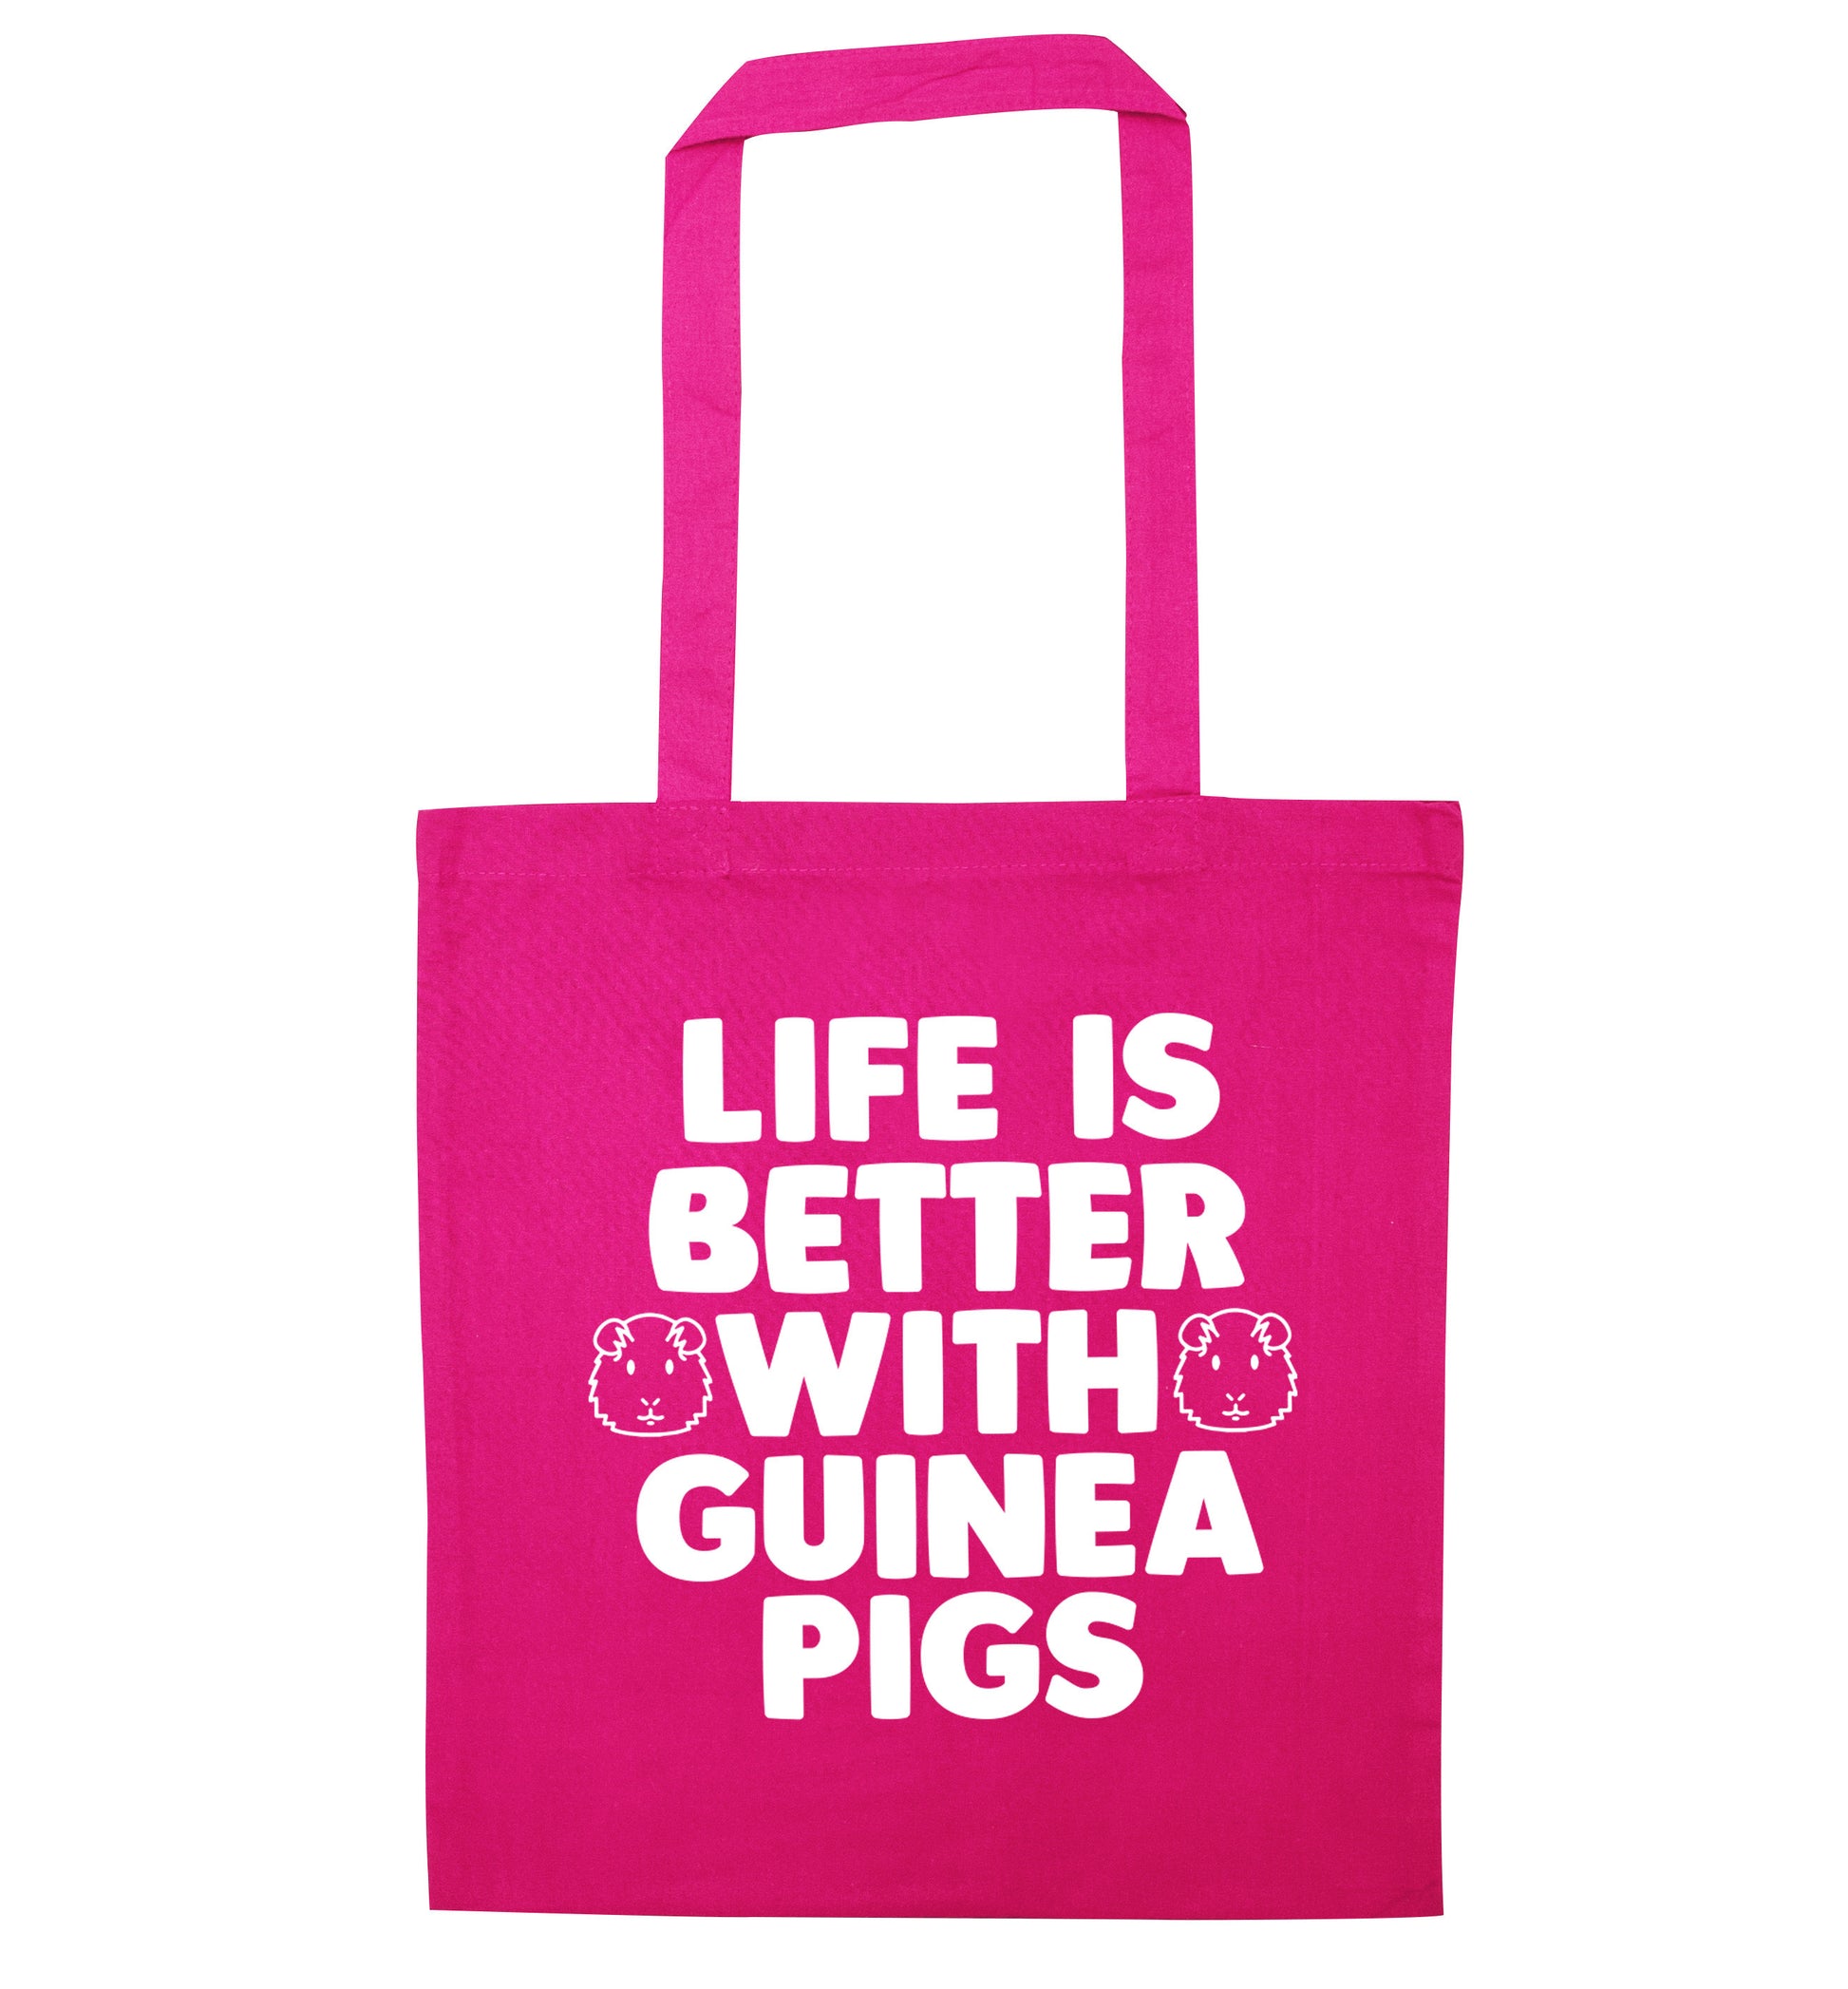 Life is better with guinea pigs pink tote bag